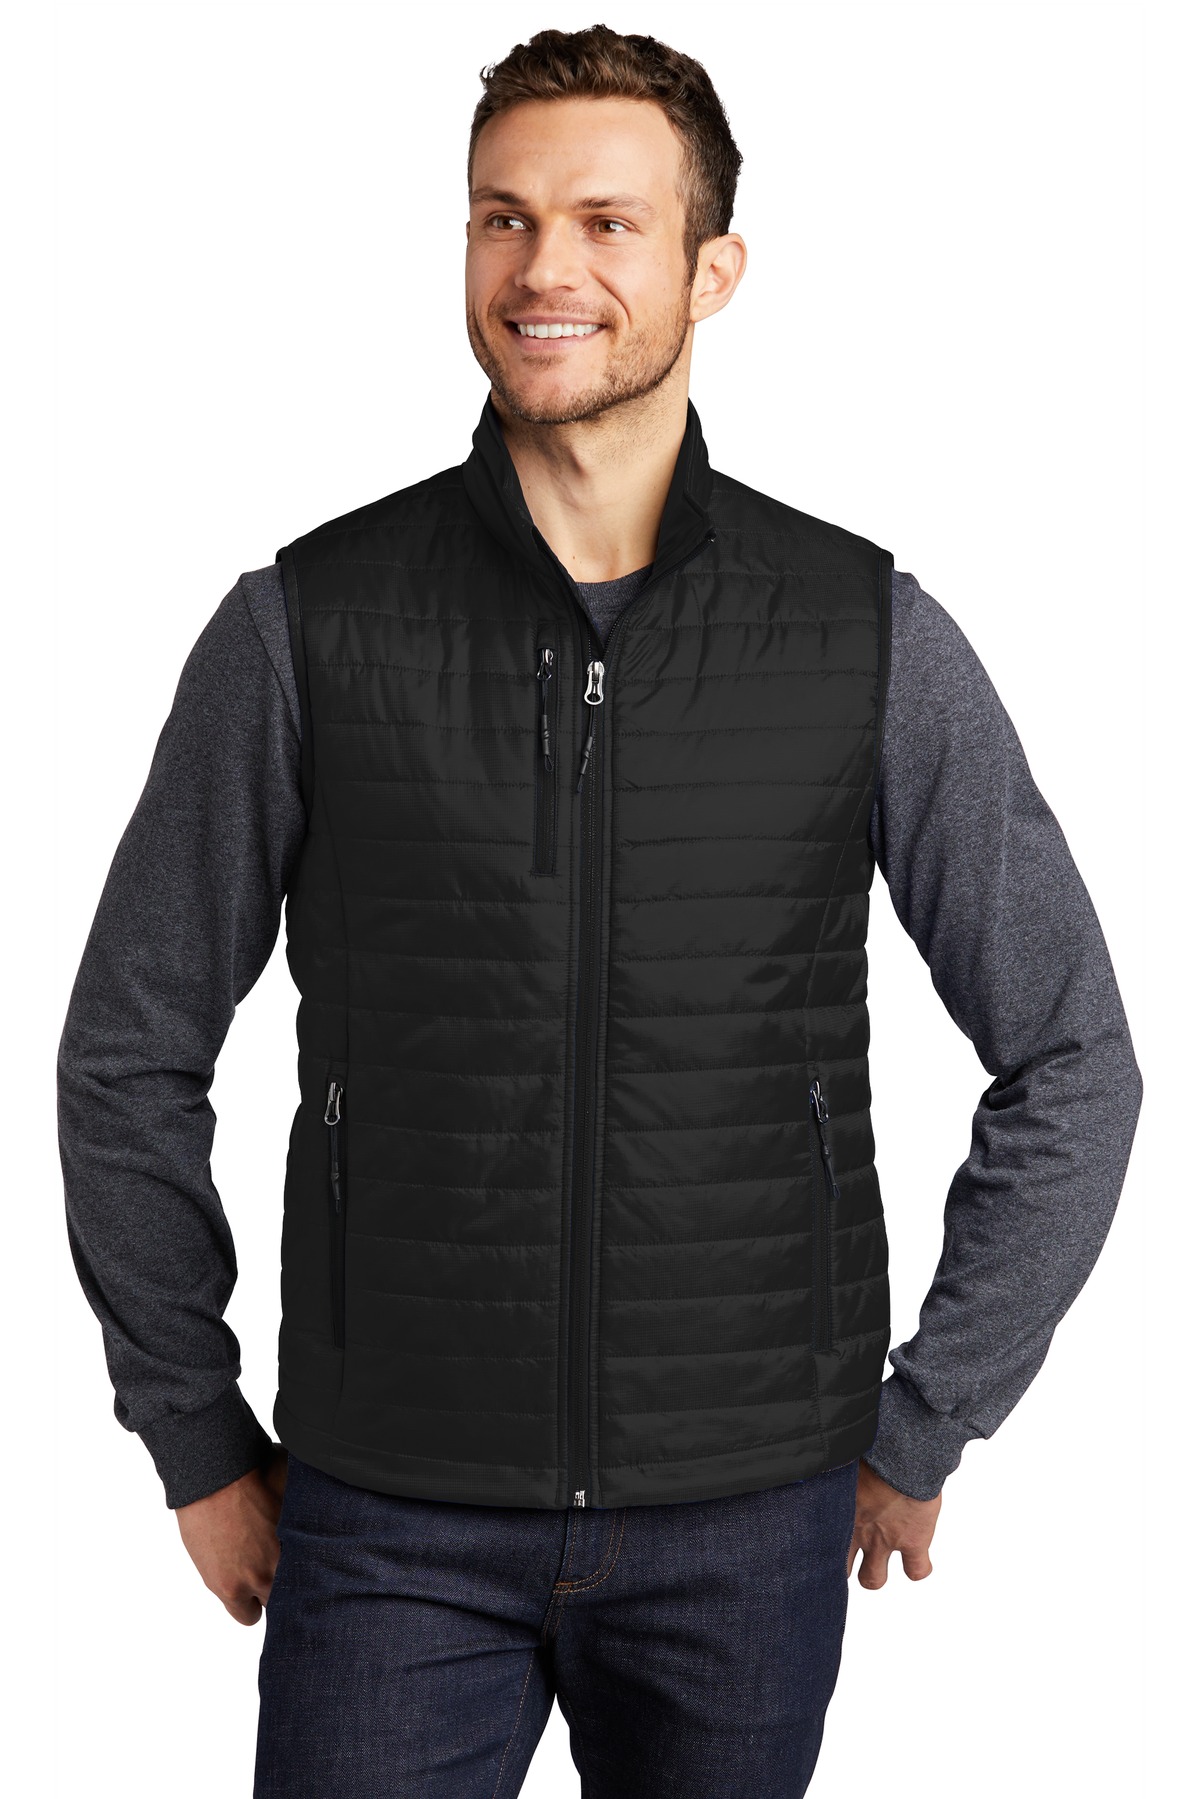 Port Authority Packable Puffy Vest-Port Authority